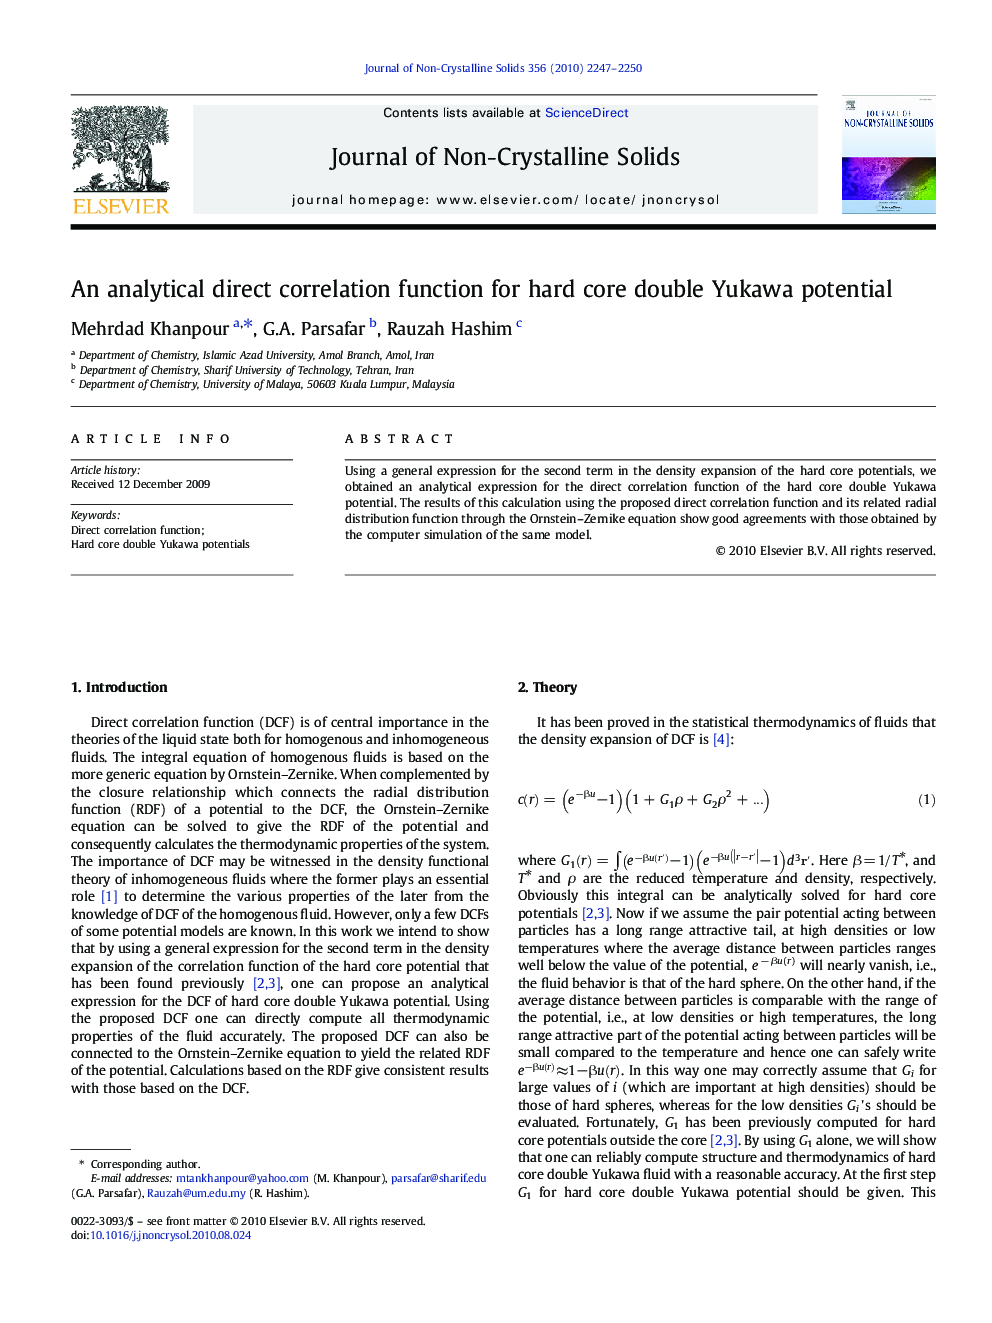 An analytical direct correlation function for hard core double Yukawa potential